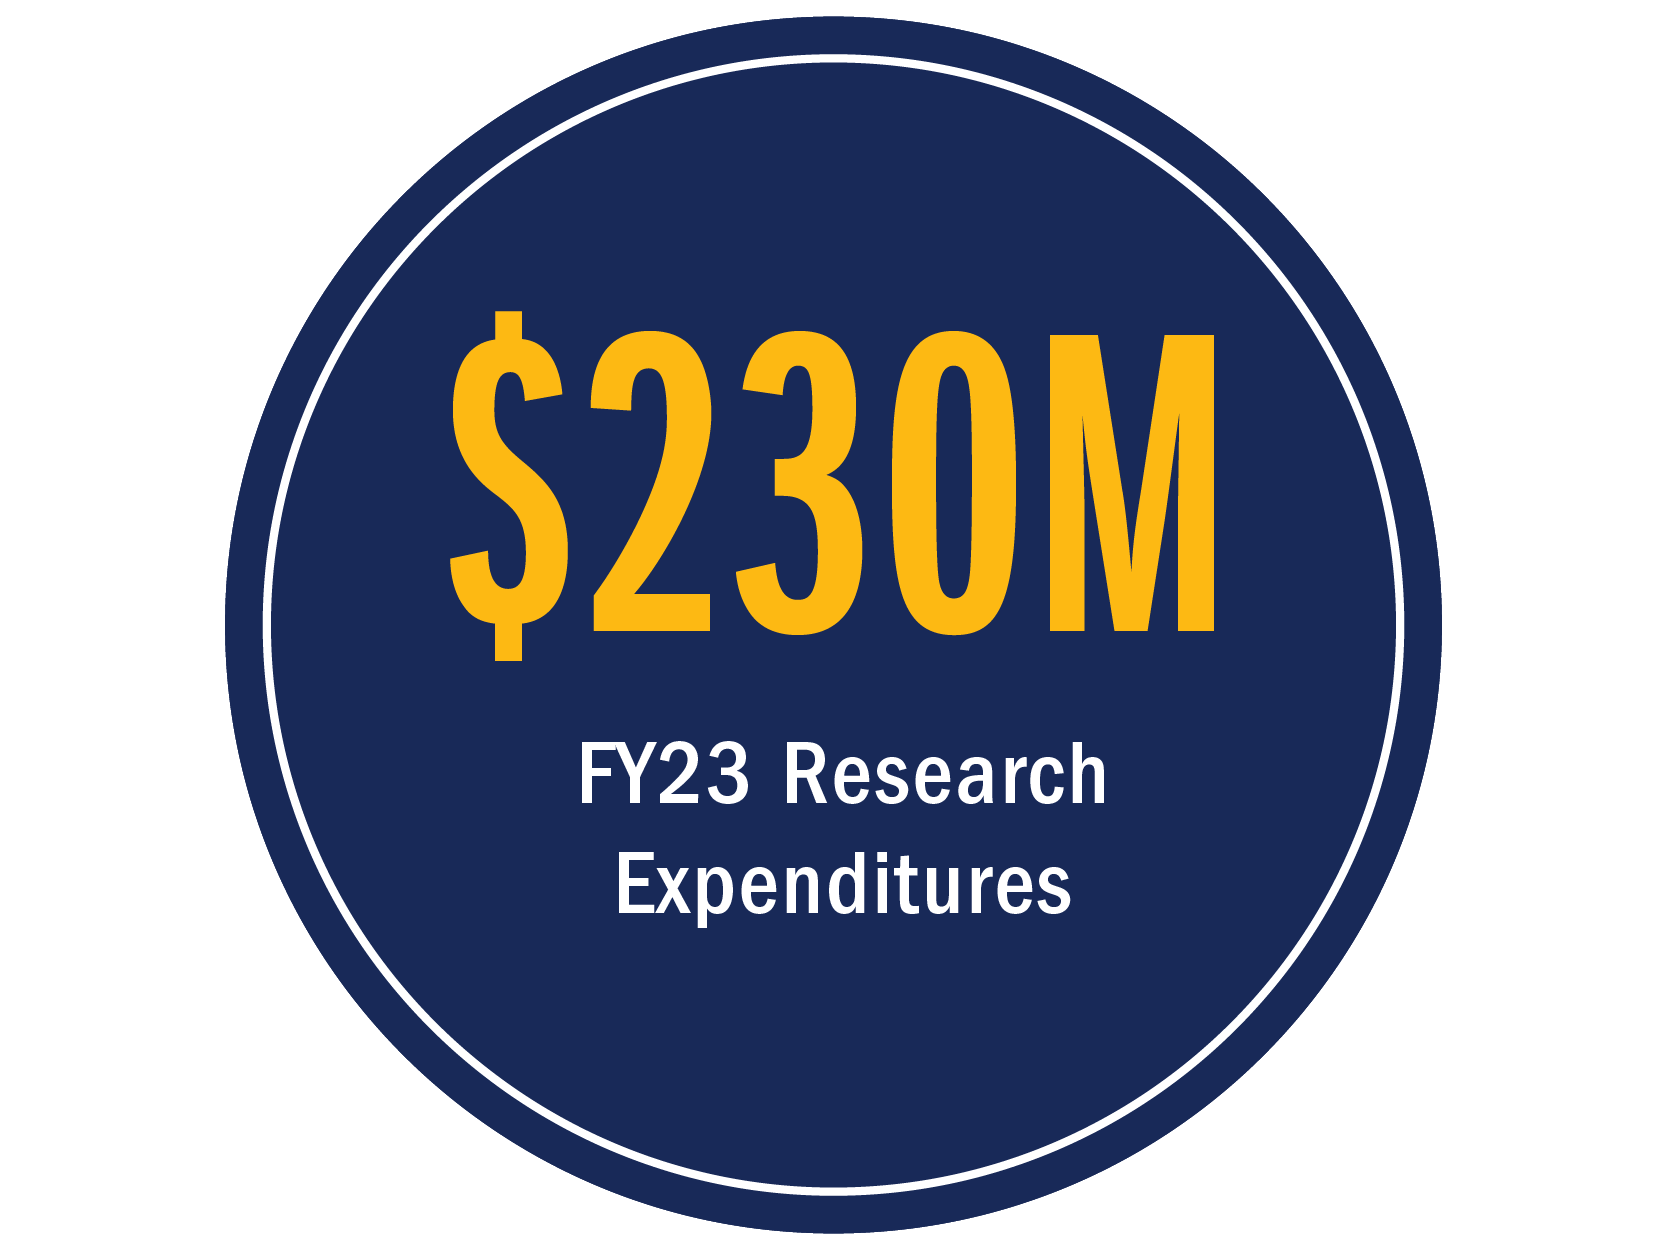 $230M - FY23 Research Expenditures